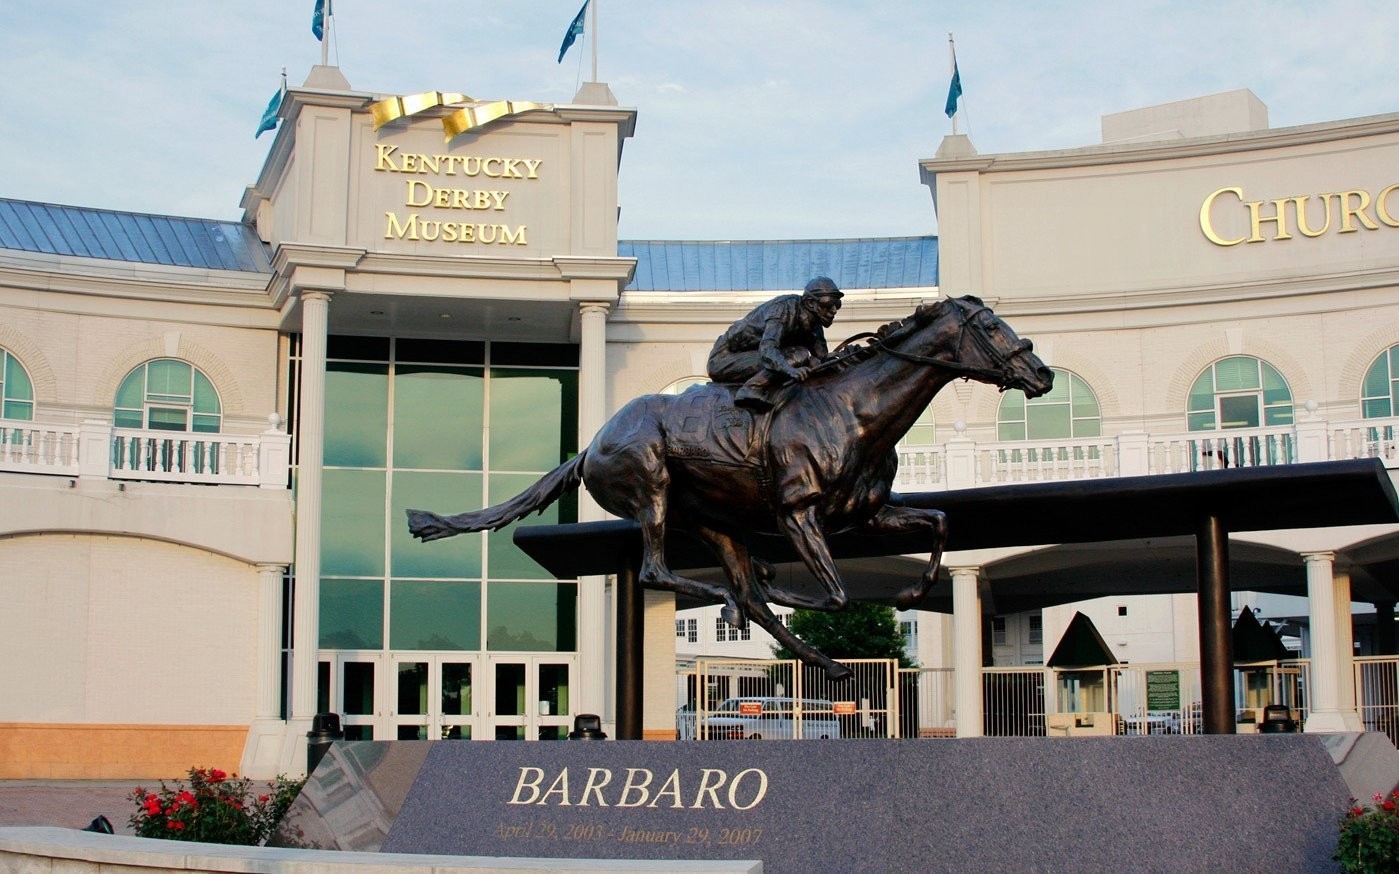 Kentucky Derby Museum, Together with Secretariat Festival and Secretariat.com,  Attempts World Record for Largest Horseshoe